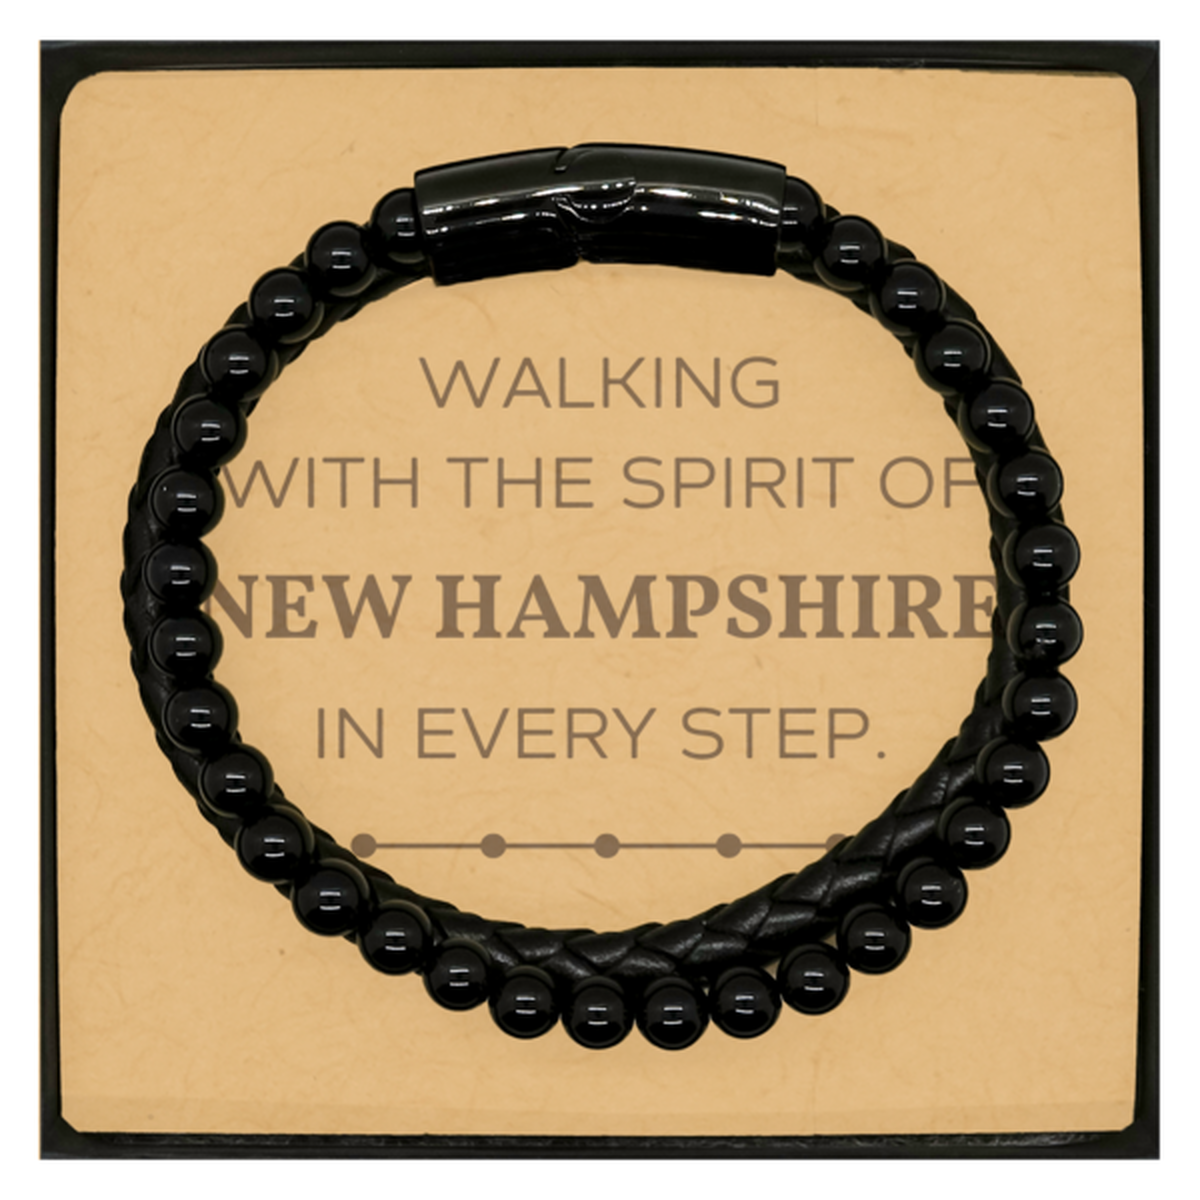 New Hampshire Gifts, Walking with the spirit, Love New Hampshire Birthday Christmas Stone Leather Bracelets For New Hampshire People, Men, Women, Friends